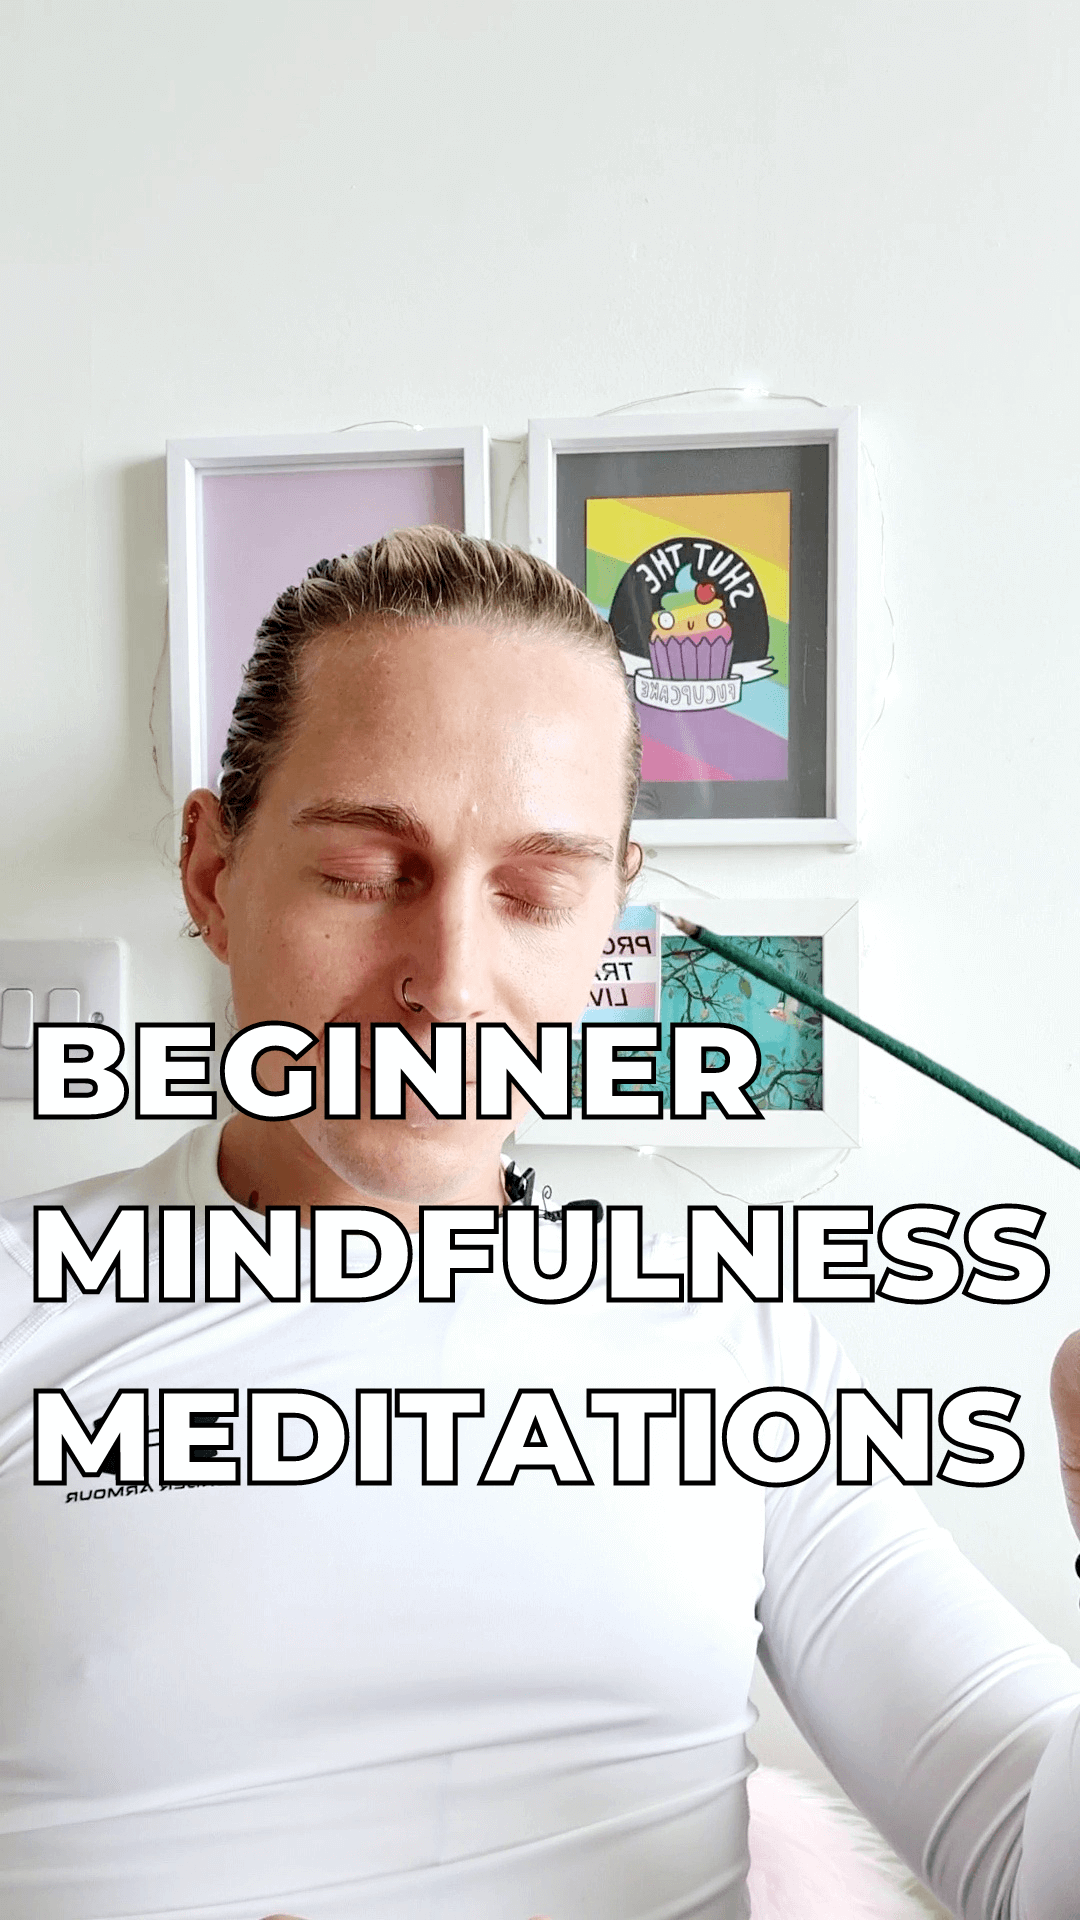 James Kearslake, owner of LGBTQ Wellness, providing 10 – 15 minute beginner mindfulness meditations, playable on Spotify and all major podcast platforms